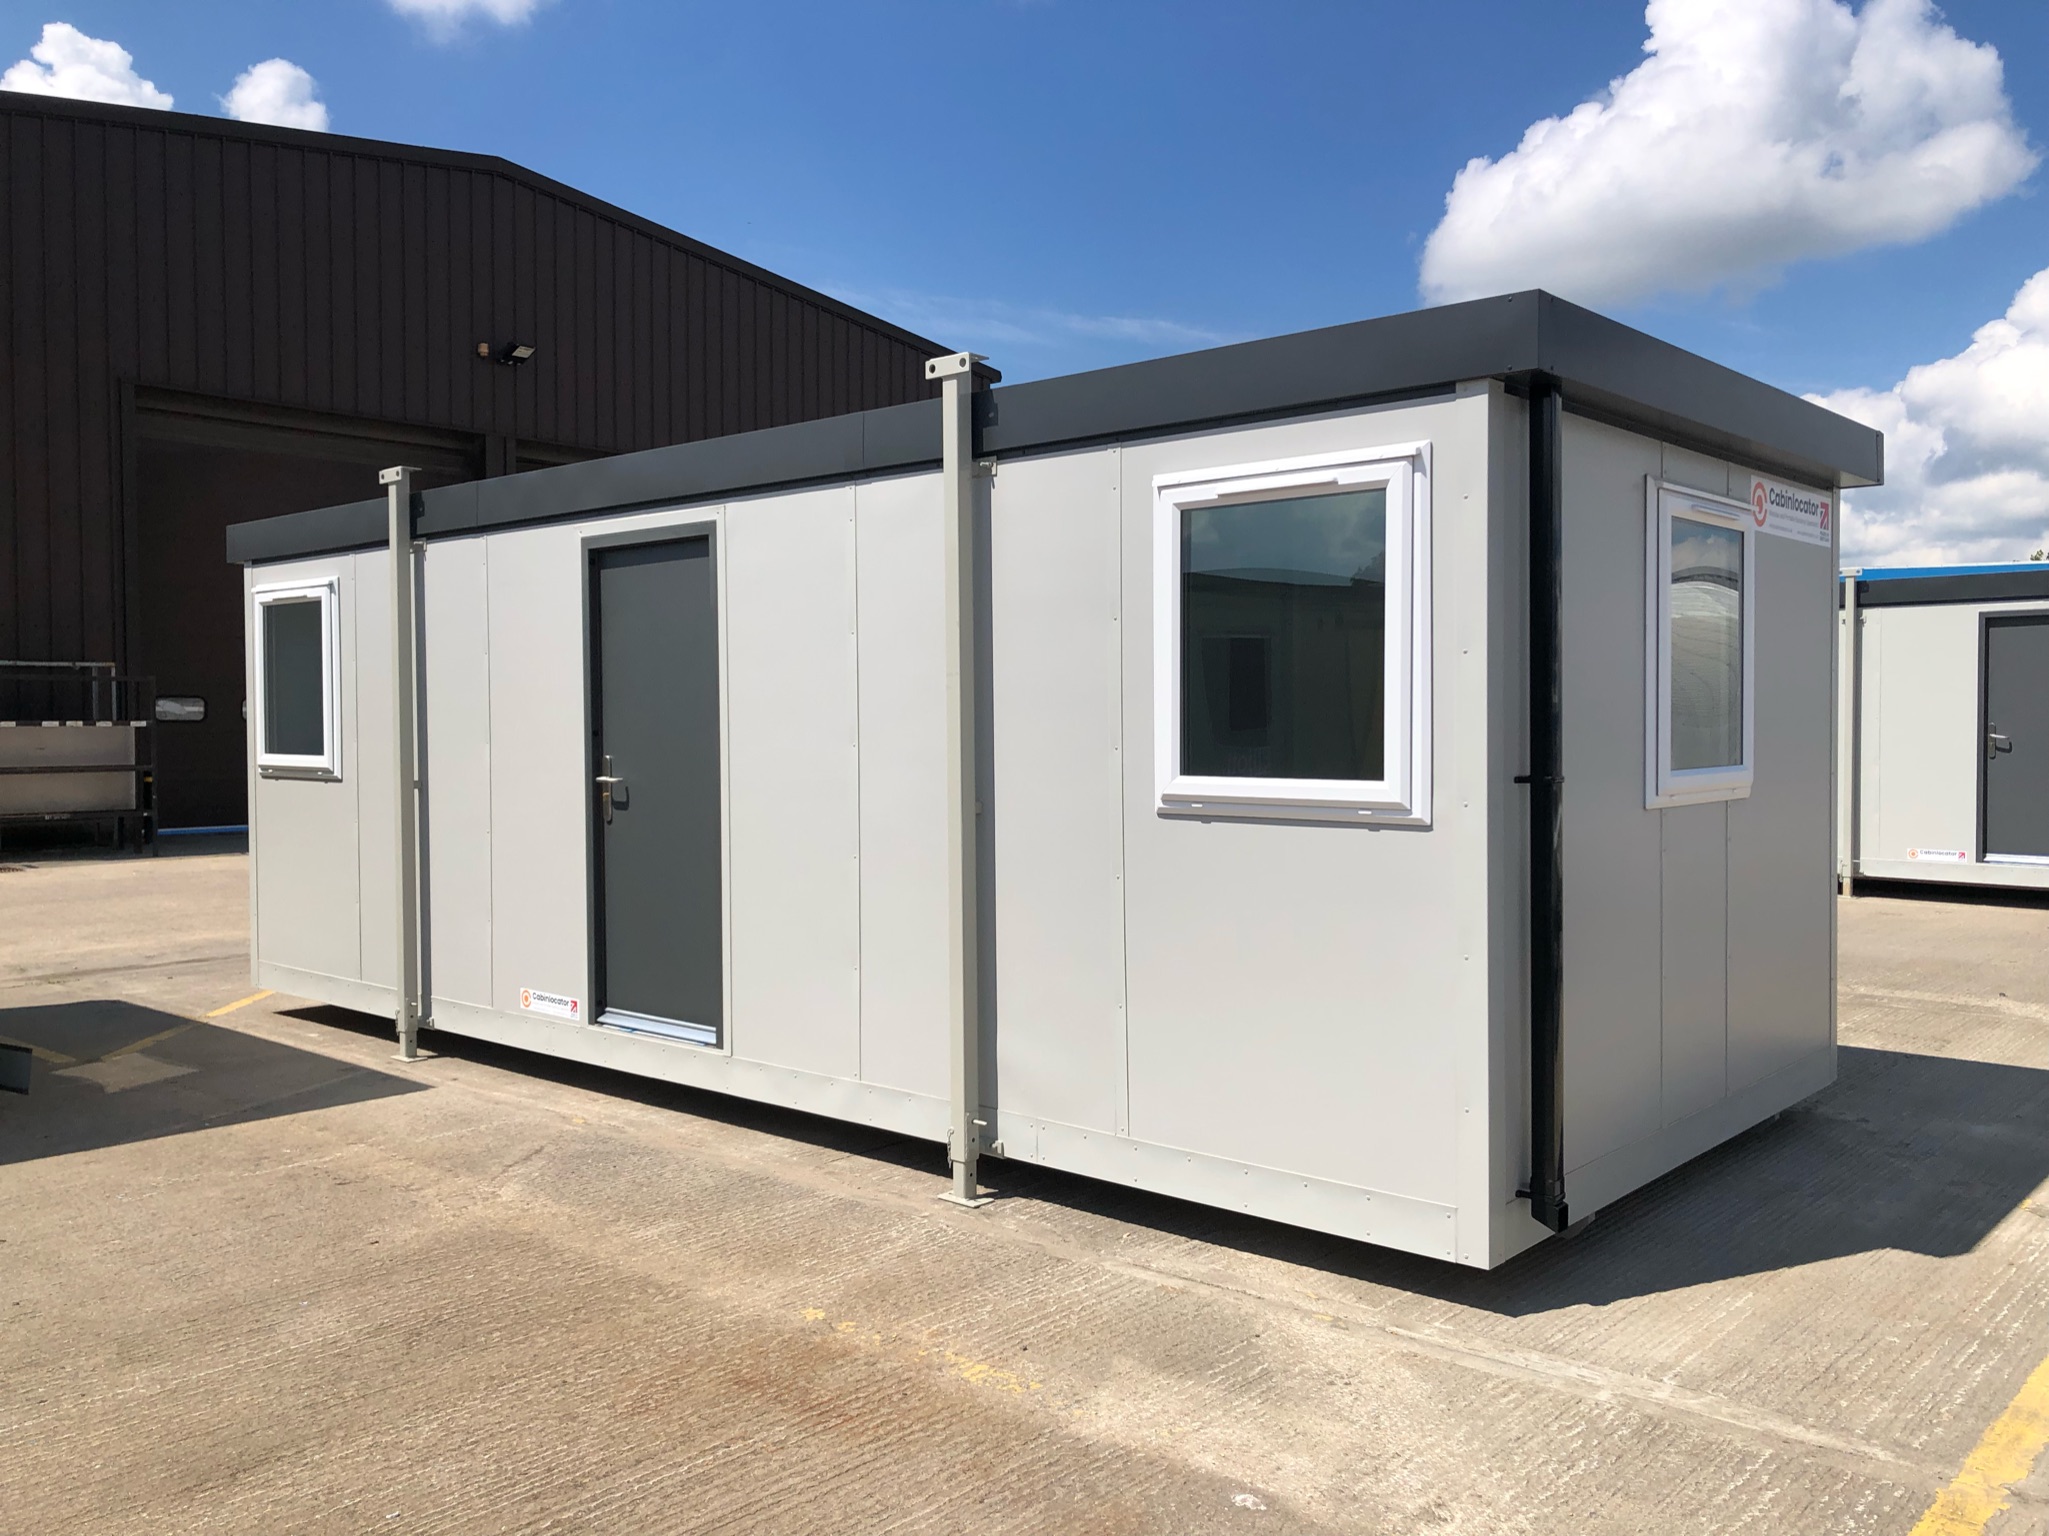 What Ways Can Schools Utilise Portable Classrooms?